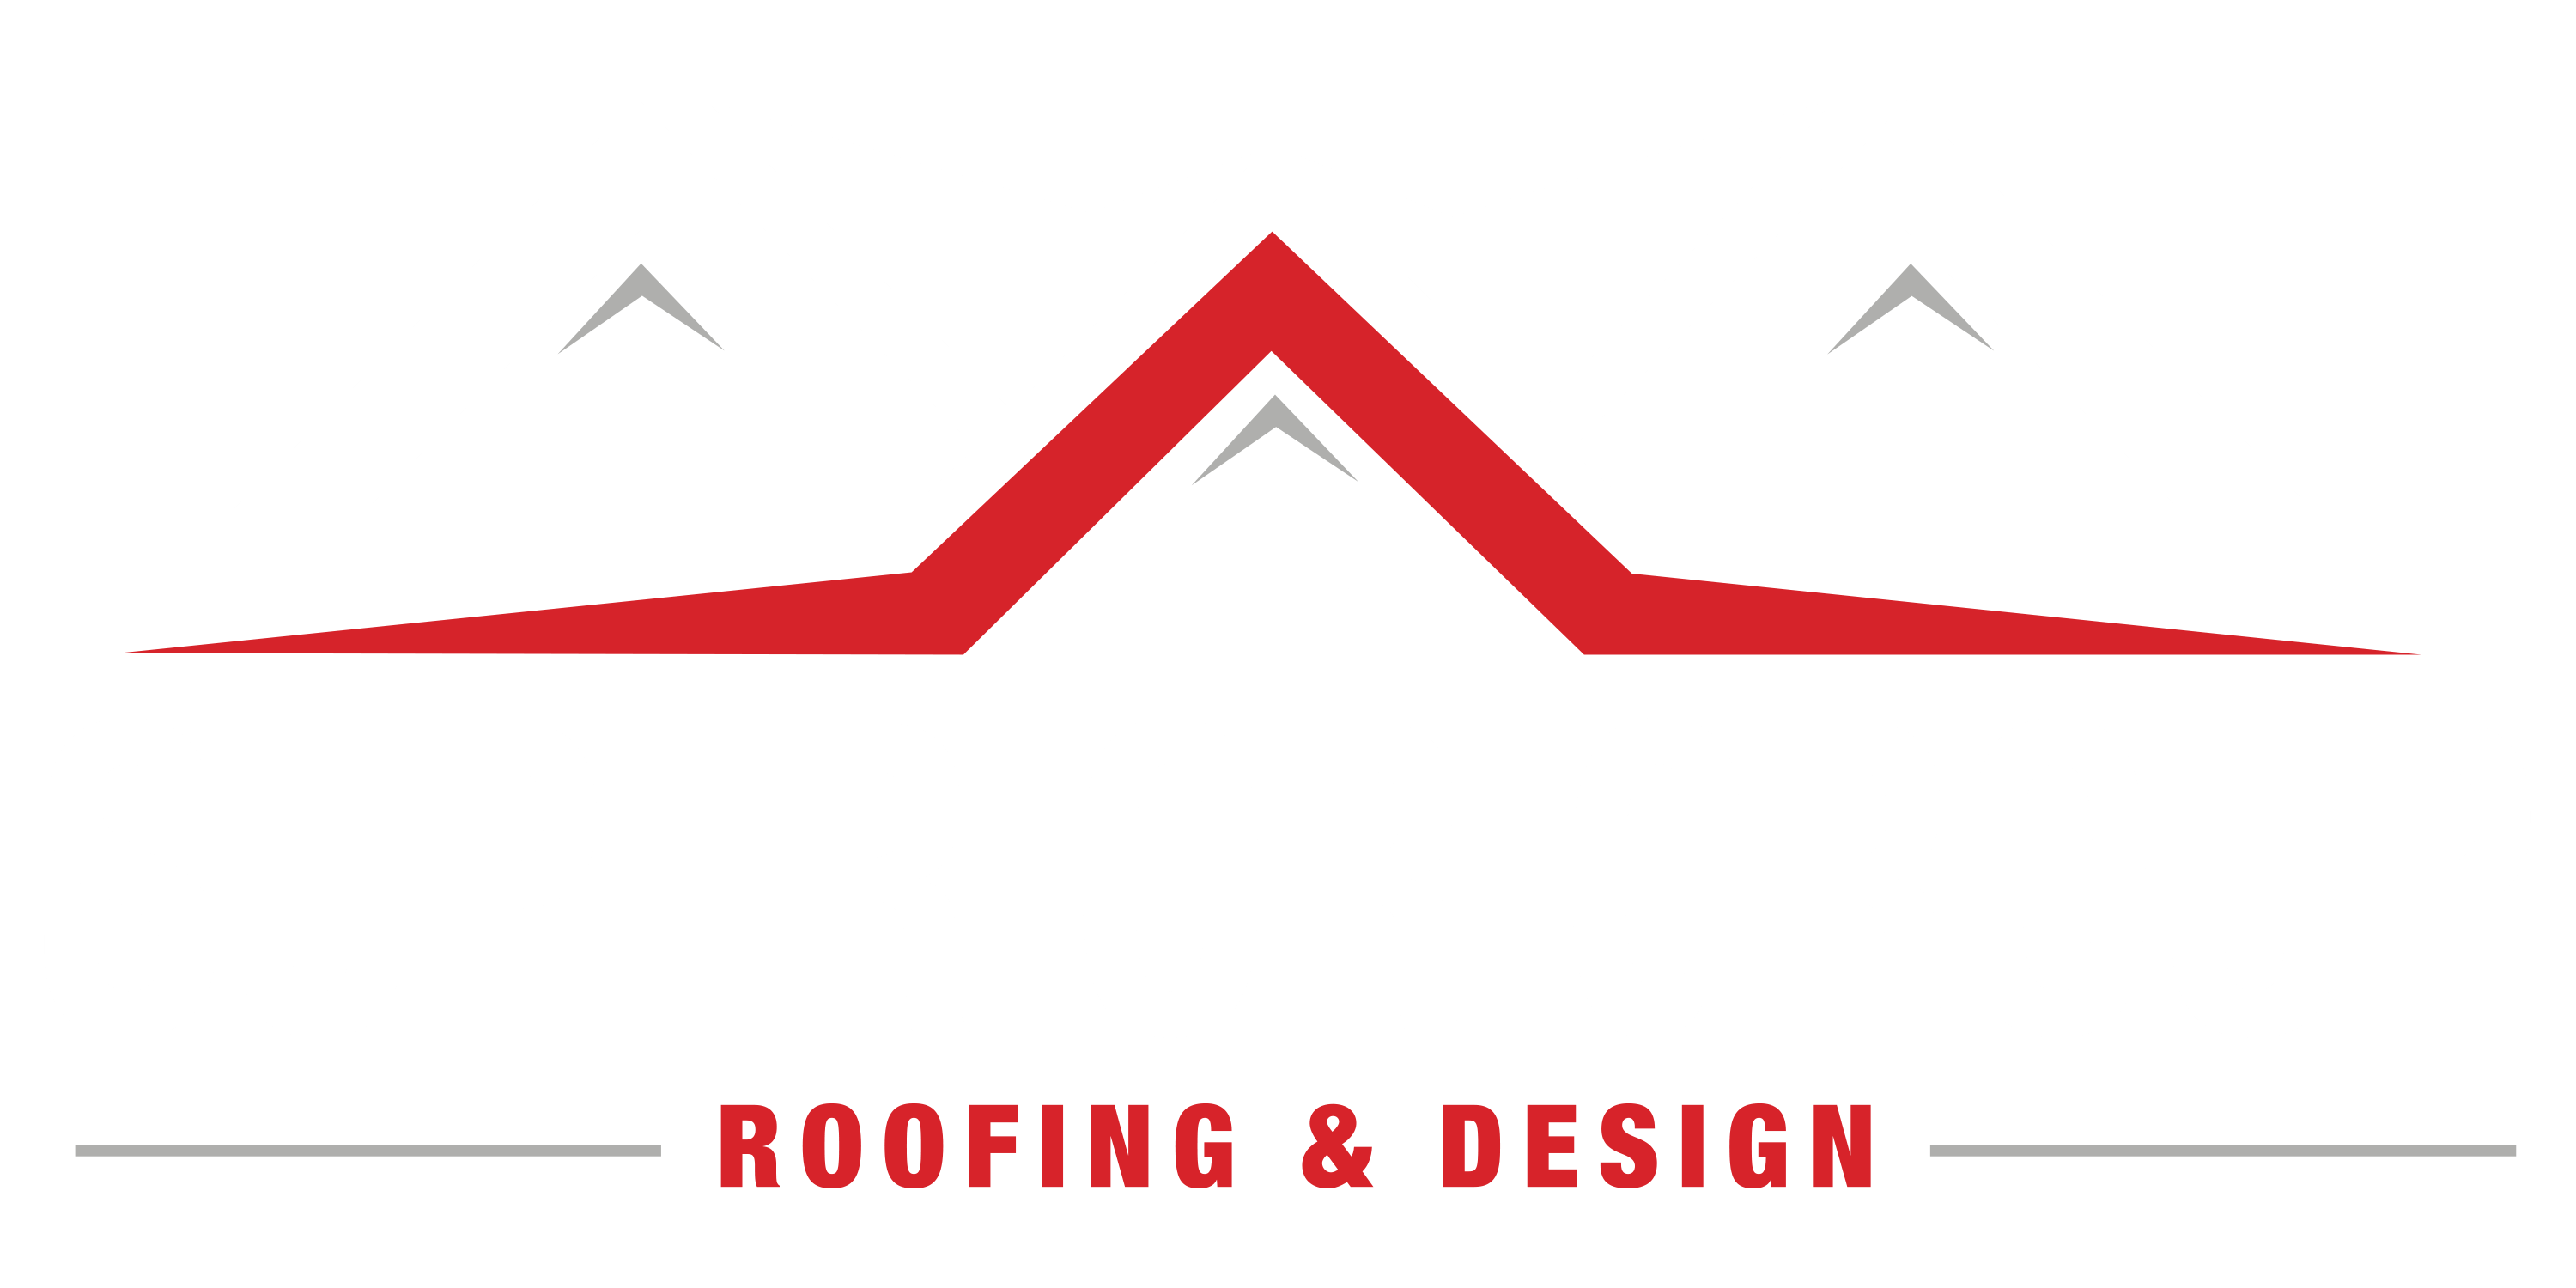 Superior Group Roofing & Design - Local Roofers